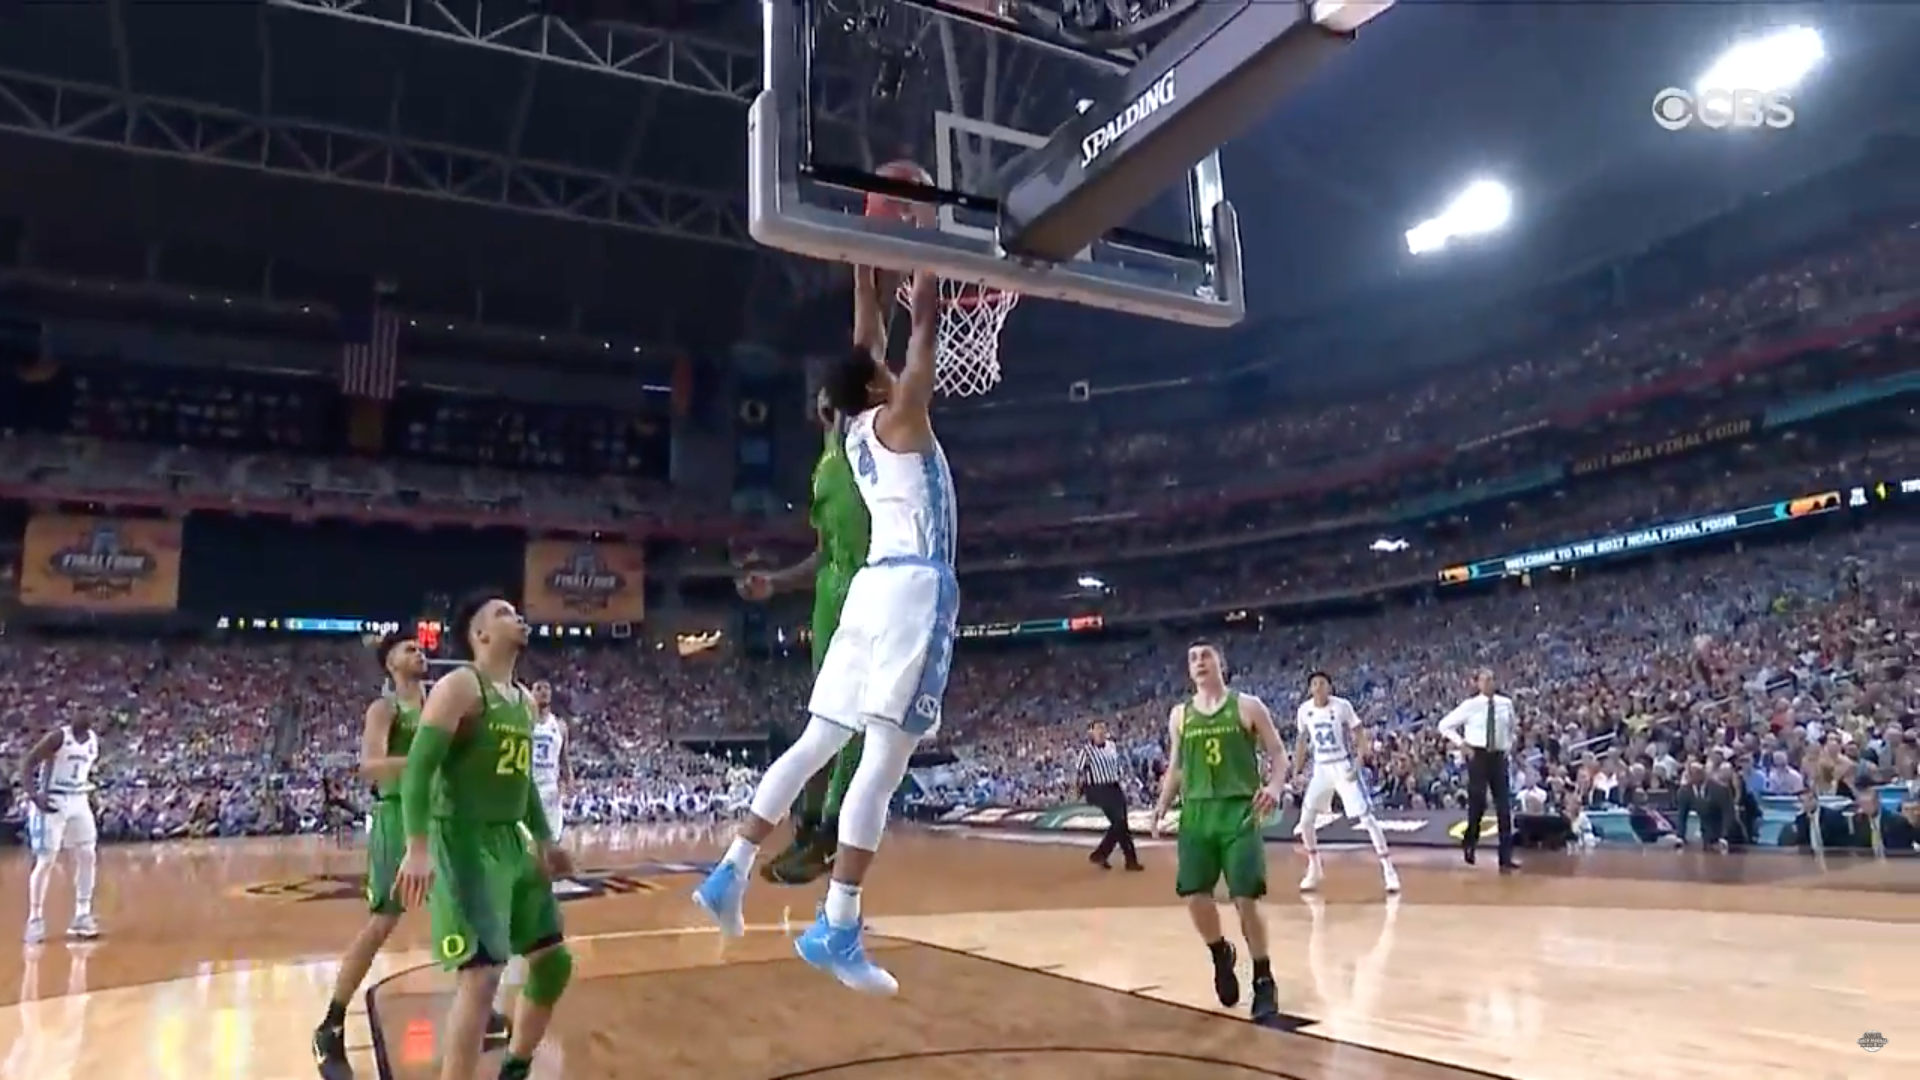 Oregon Ducks and the North Carolina Tar Heels compete in the Final Four. Photo by: March Madness / YouTube